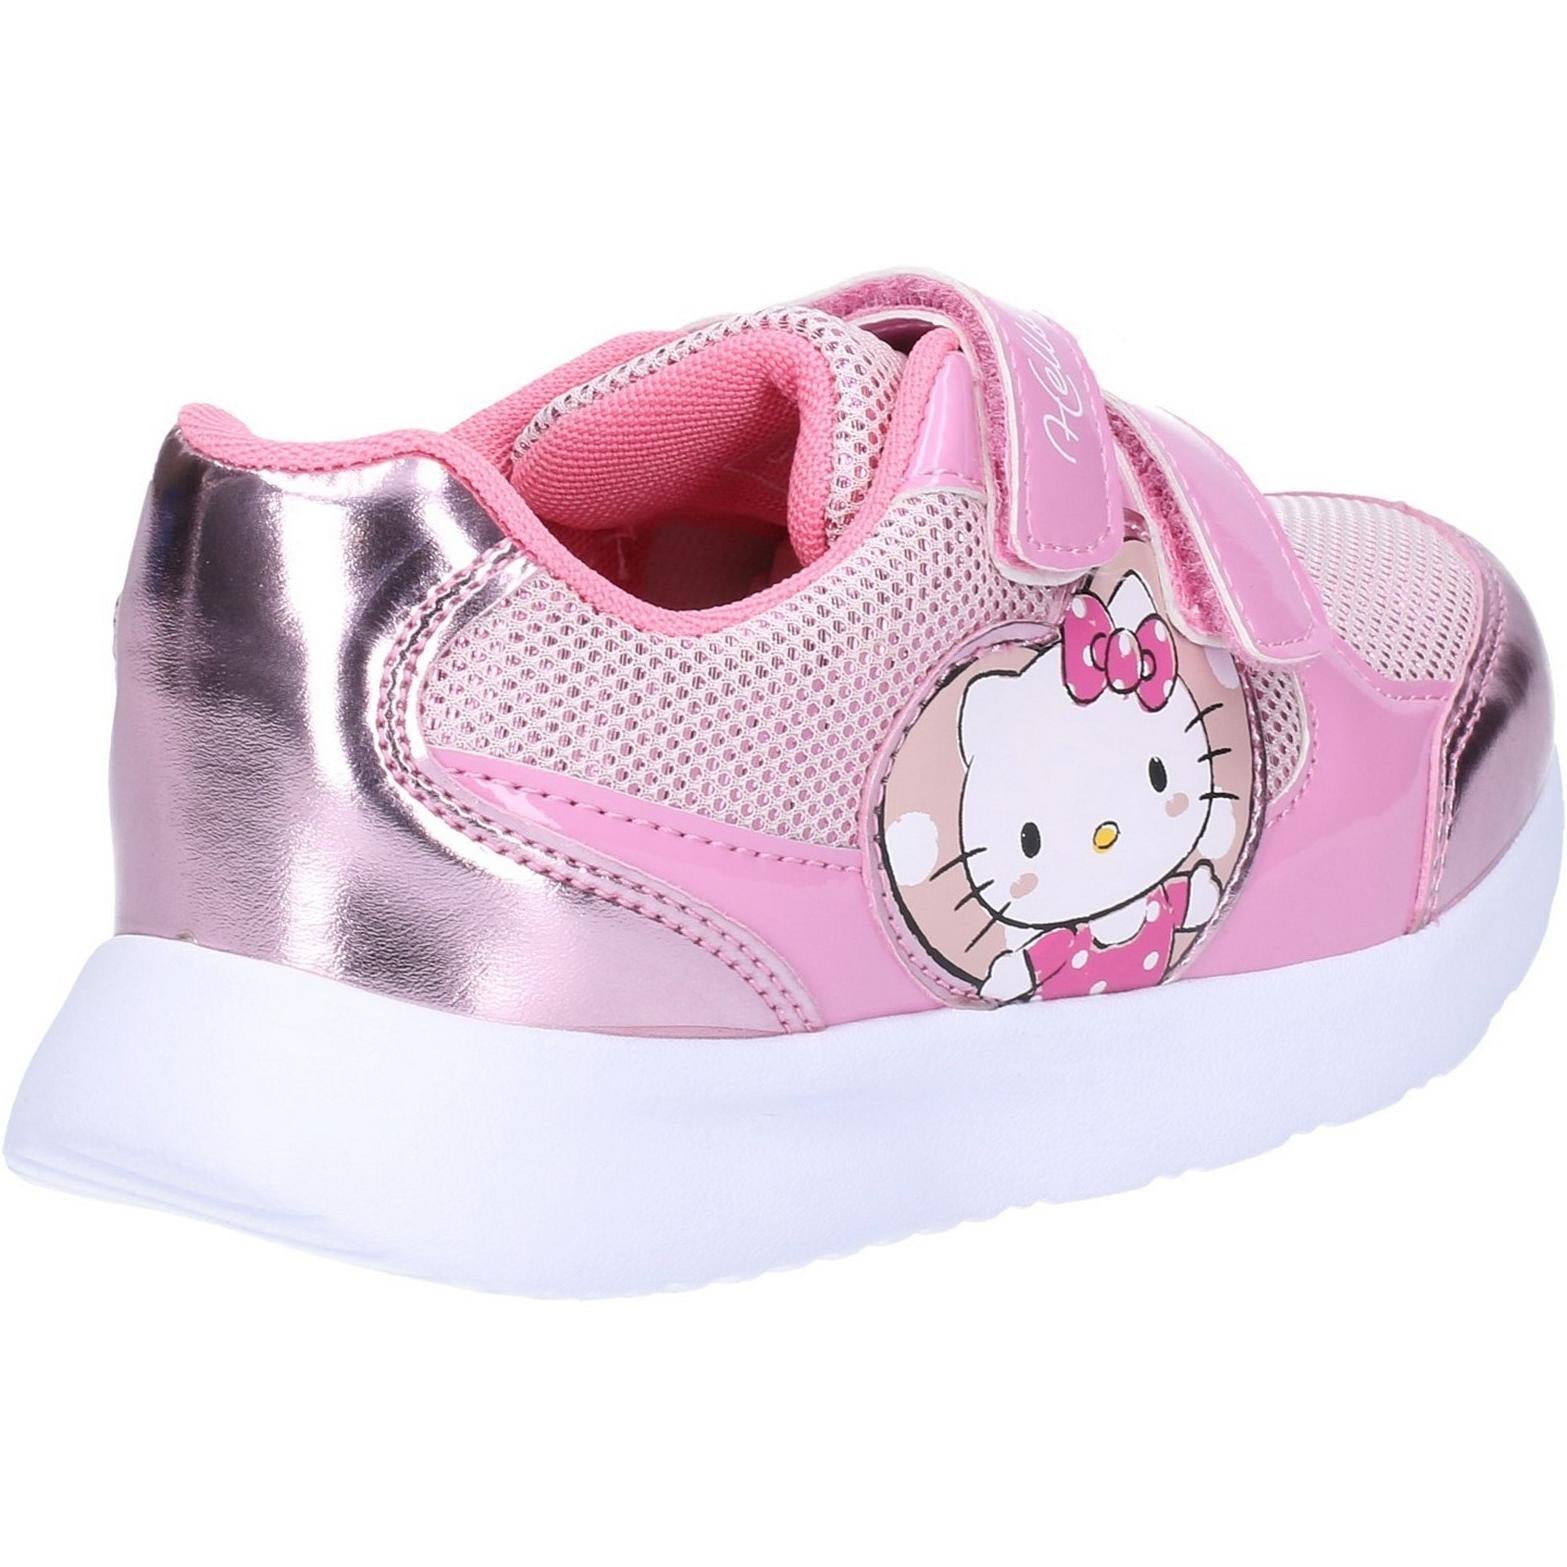 Leomil Hello Kitty Touch Fastening Trainer